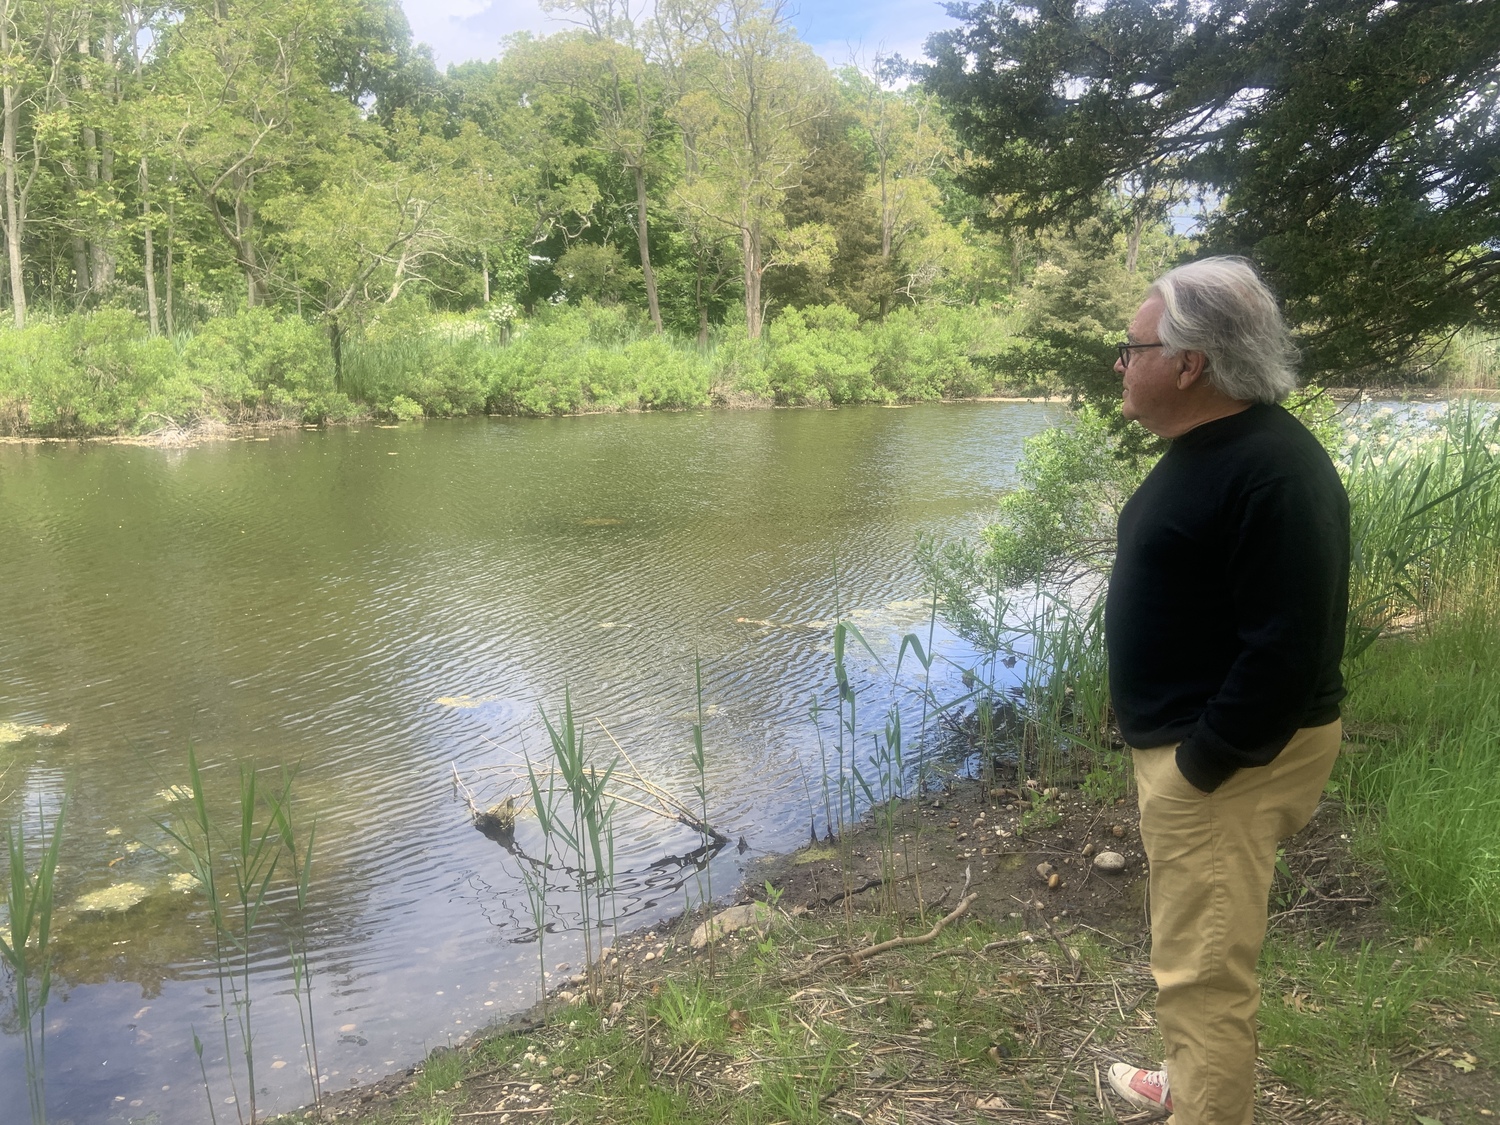 North Haven Mayor Chris Fiore at Cilli Pond in North Haven. STEPHEN J. KOTZ